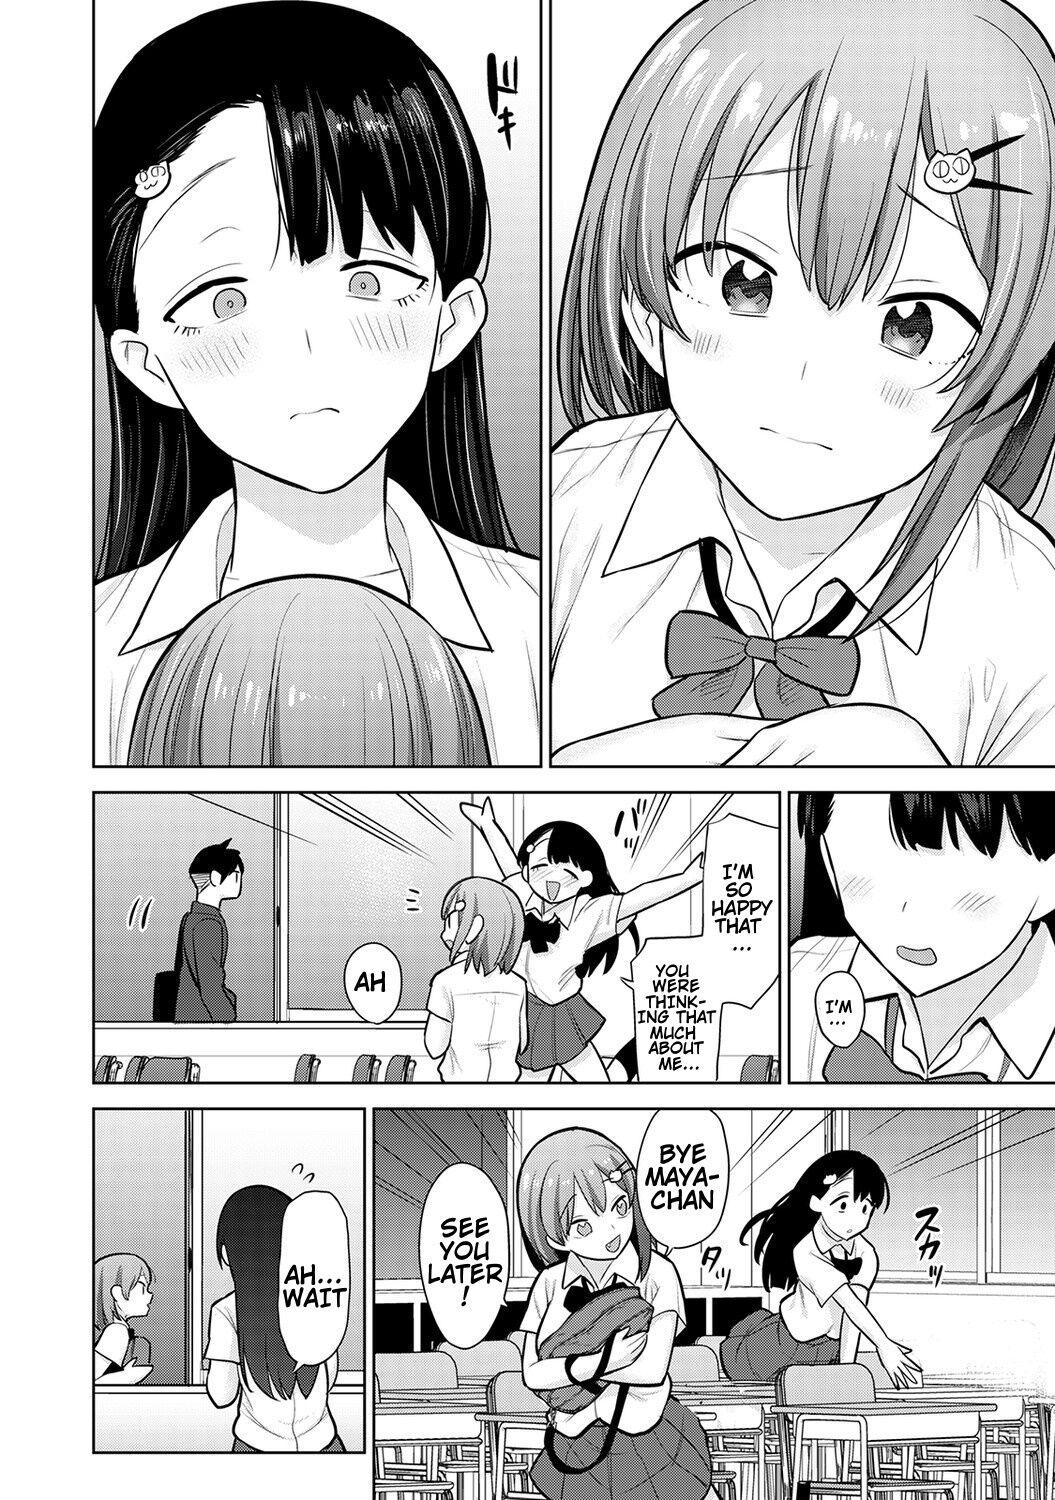 SotsuAl Cameraman to Shite Ichinenkan Joshikou no Event e Doukou Suru Koto ni Natta Hanashi | A Story About How I Ended Up Being A Yearbook Cameraman at an All Girls' School For A Year Ch. 3 4